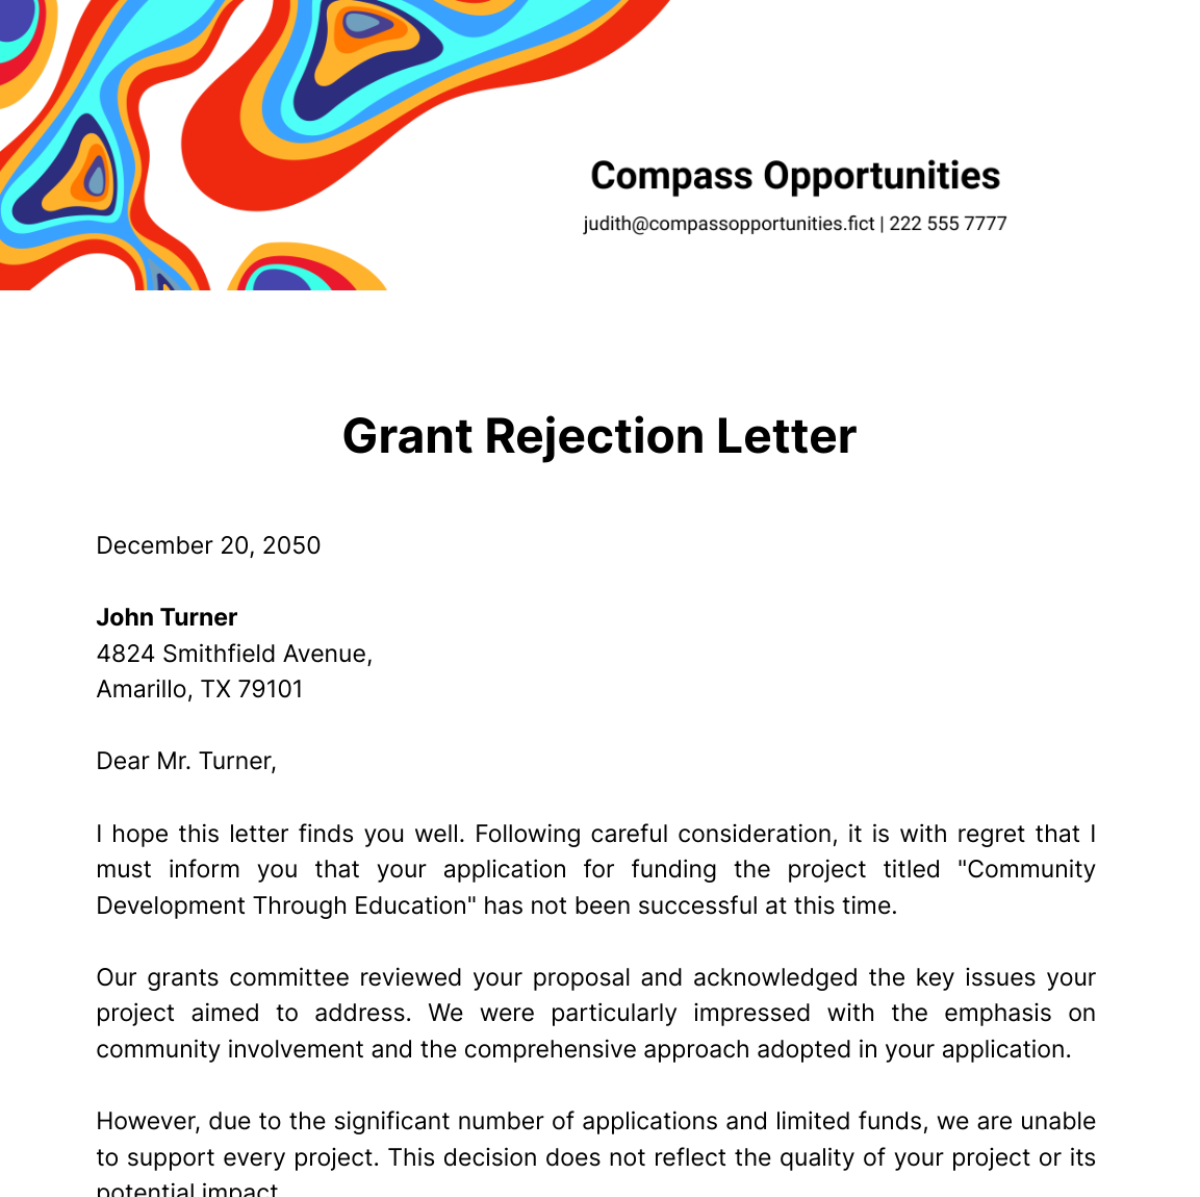 Grant Rejection Letter Template